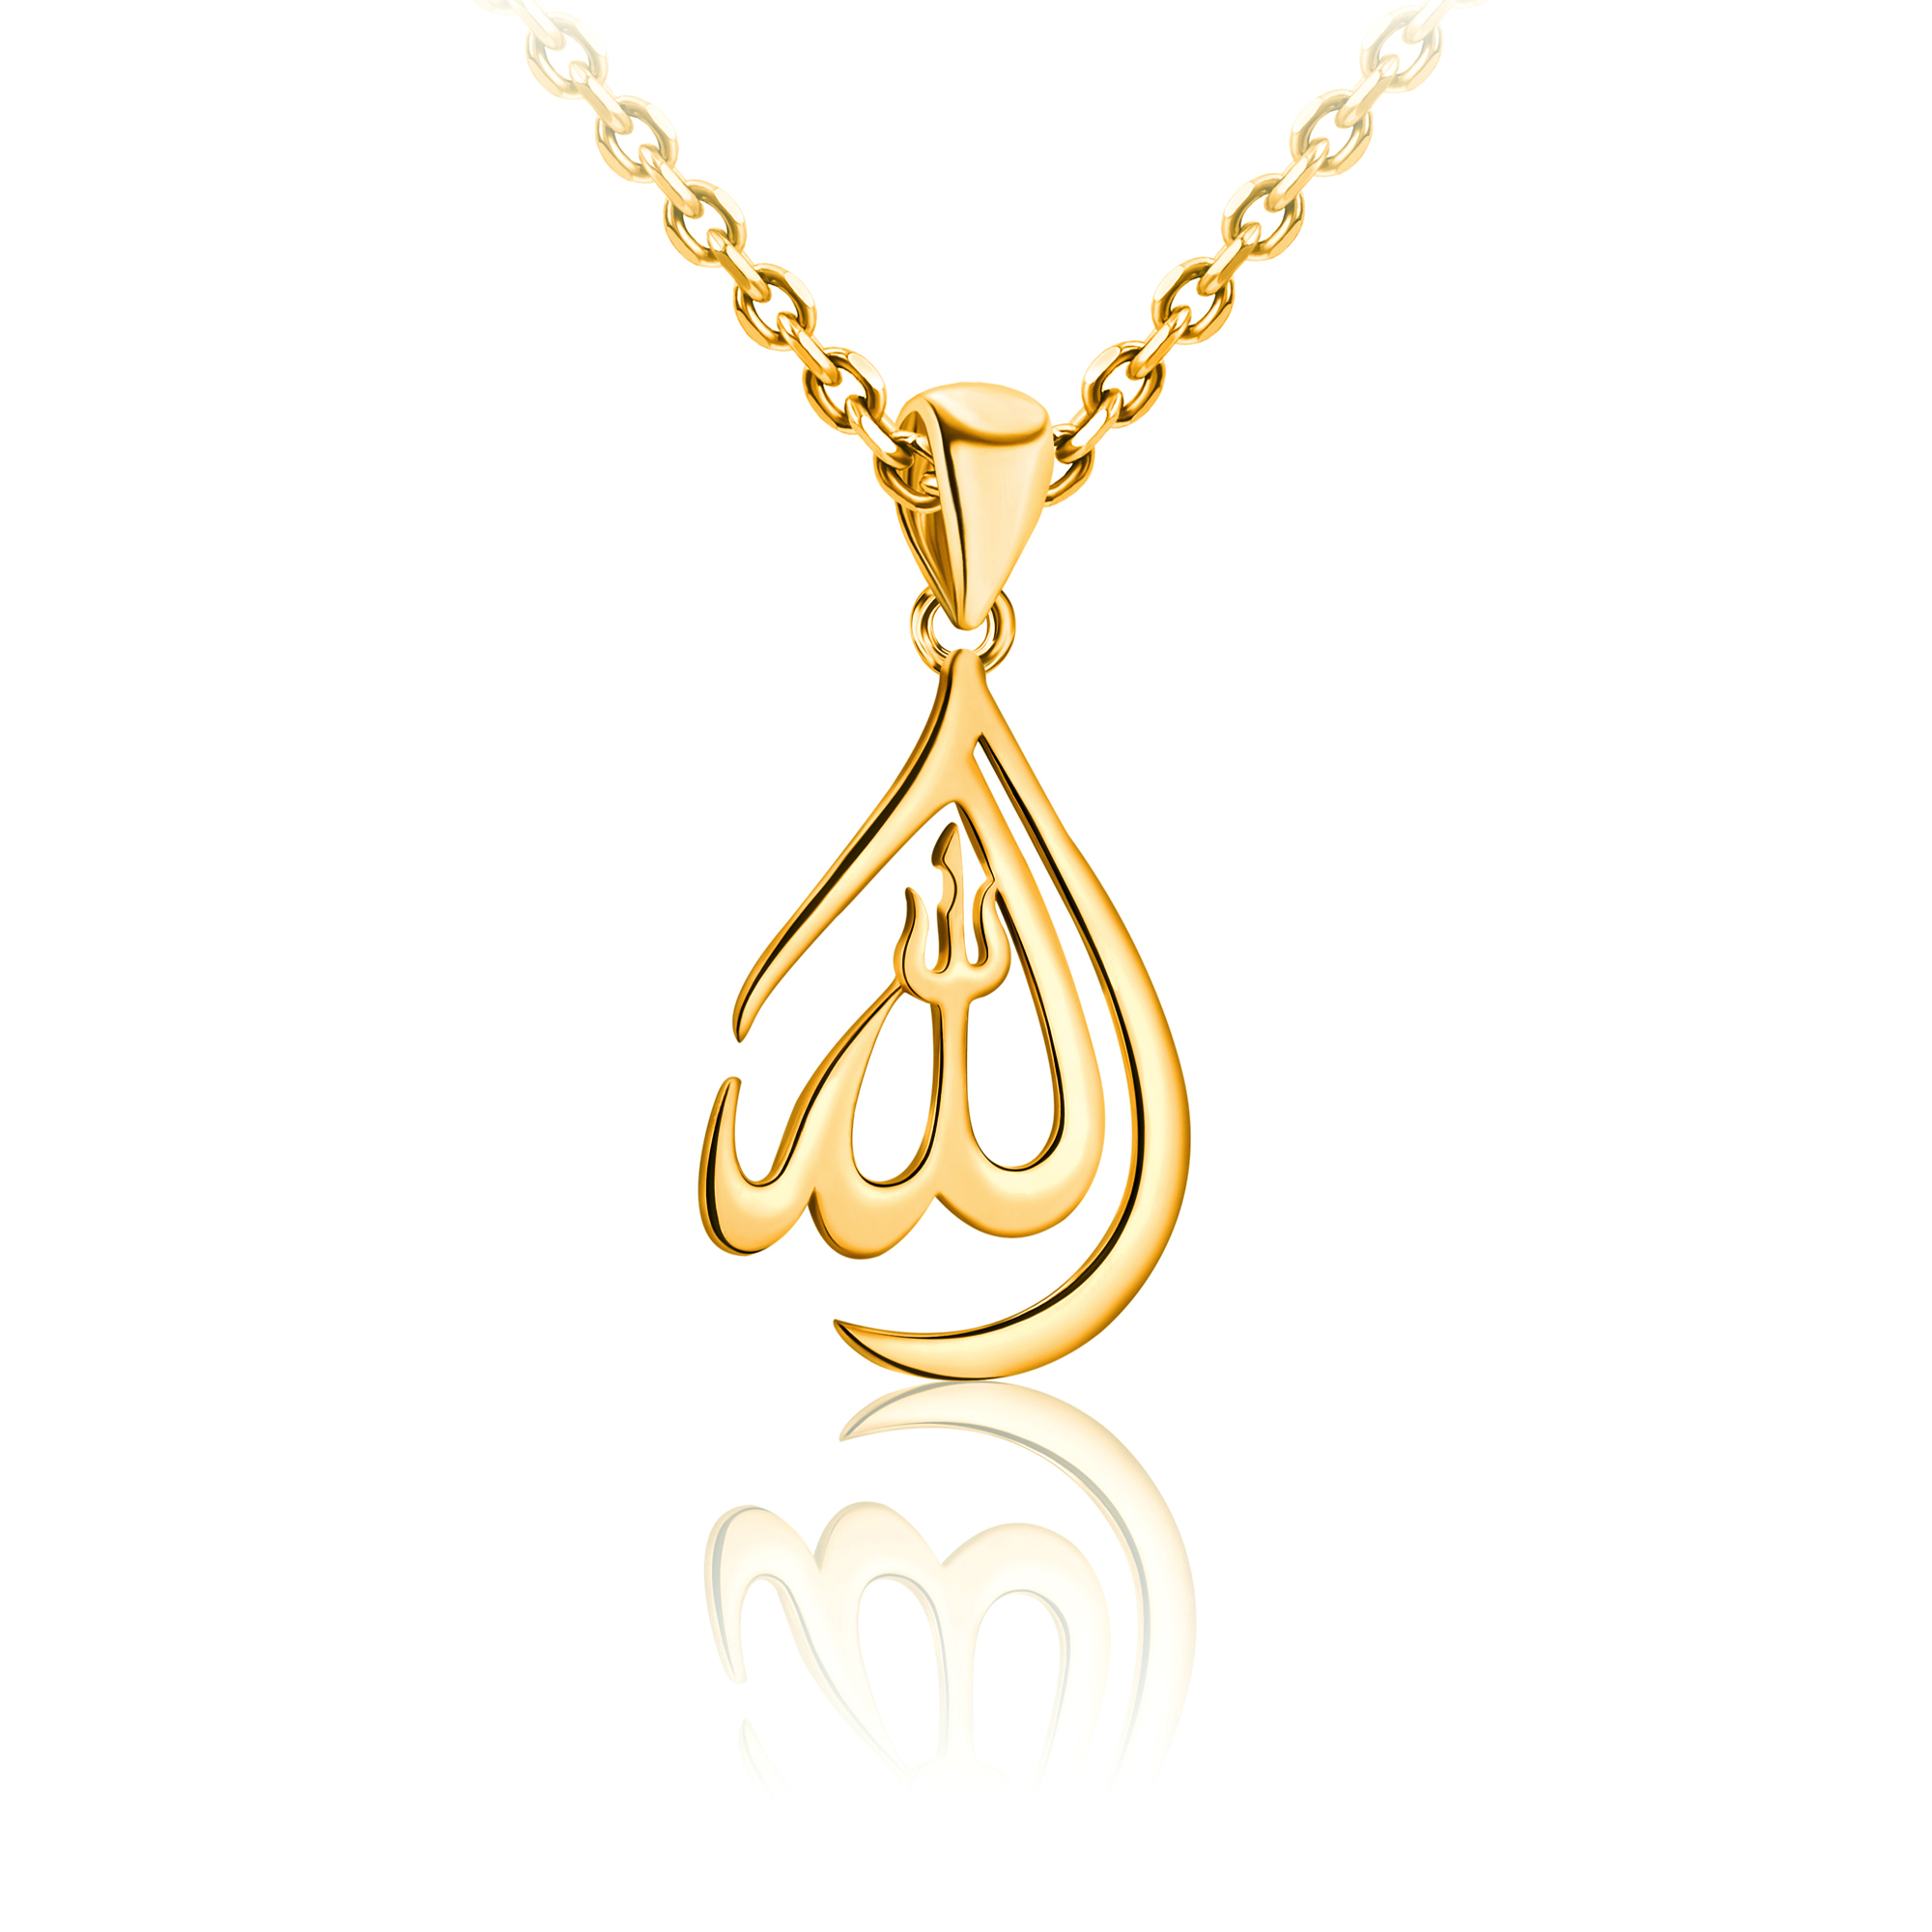 Allah Pendant Necklace in Solid Gold, Black Enamel – Pome Jewelry